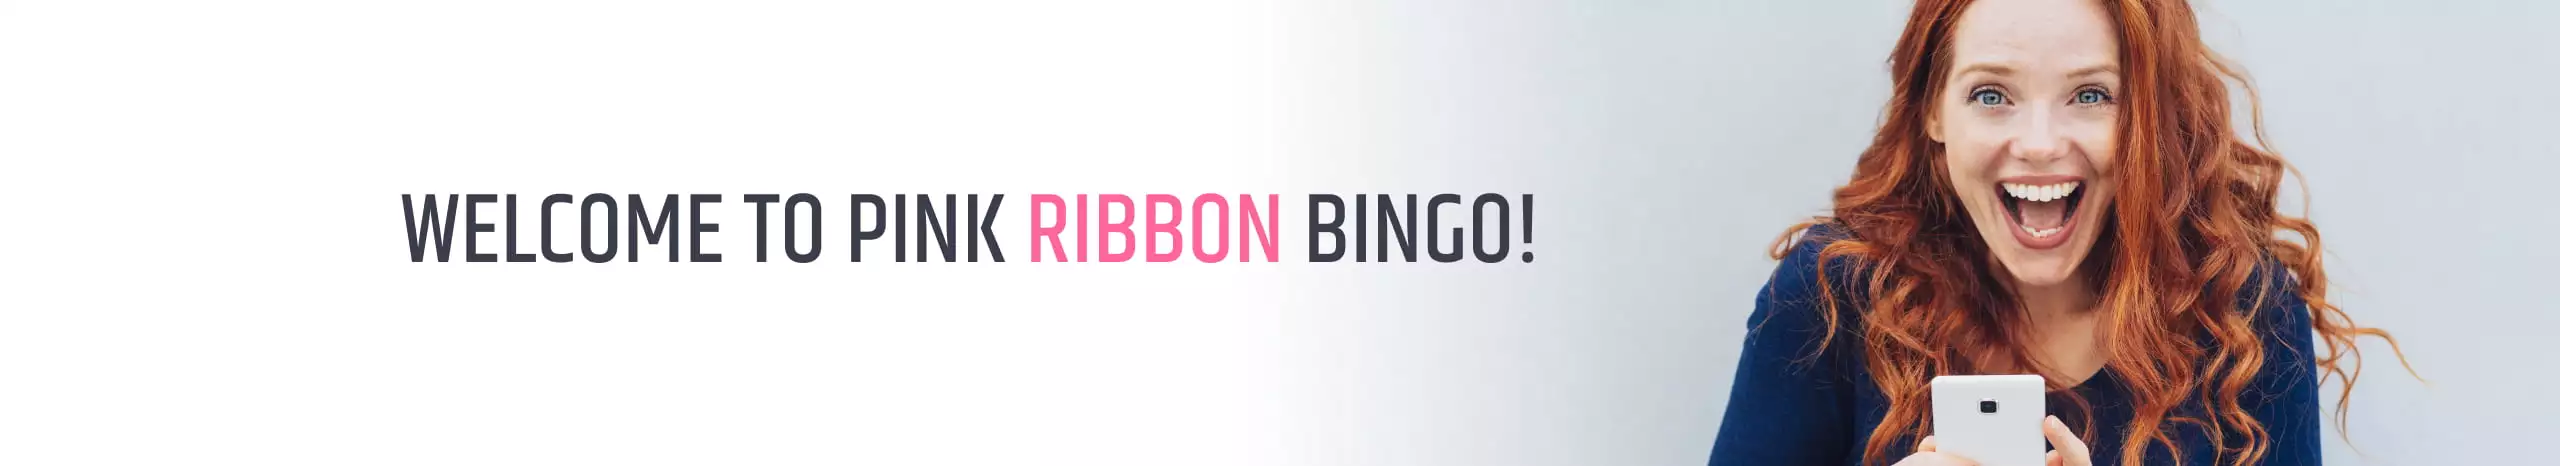 Get Bingo promotions at Pink Ribbon. We list Weekly & Monthly Promotions plus Special Bingo Games. Great Game for a Great Cause.